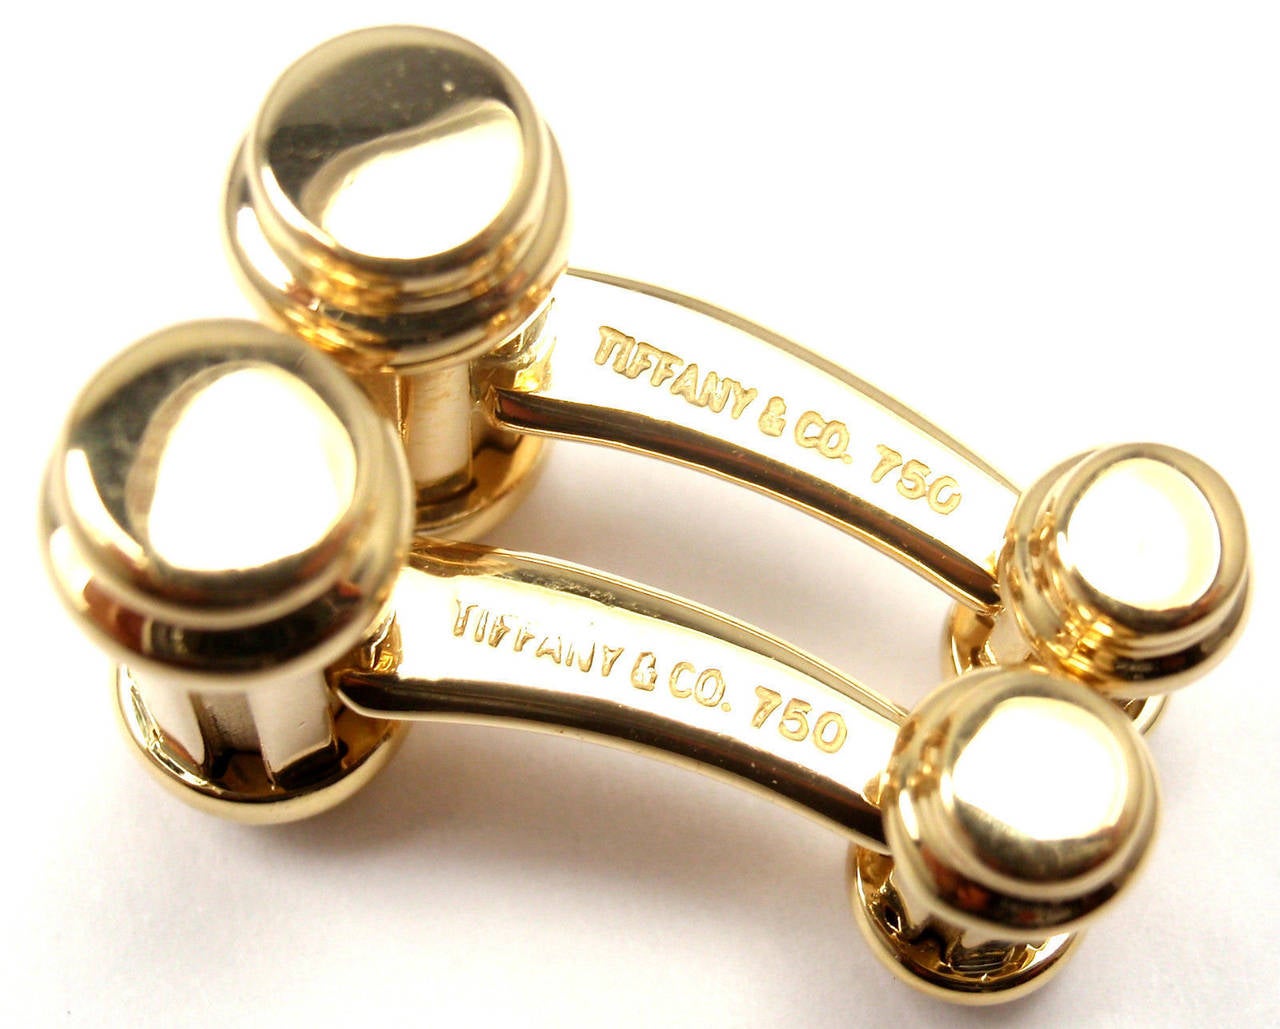 18k Yellow Gold Atlas Column Bar Cufflinks by Tiffany & Co.

Details:
Measurements: 18mm x 26mm x 12mm
Weight: 16.8 grams
Stamped Hallmarks: Tiffany & Co, 750, 1995 
*Free Shipping within the United States*

YOUR PRICE: $2,850

T129mmld